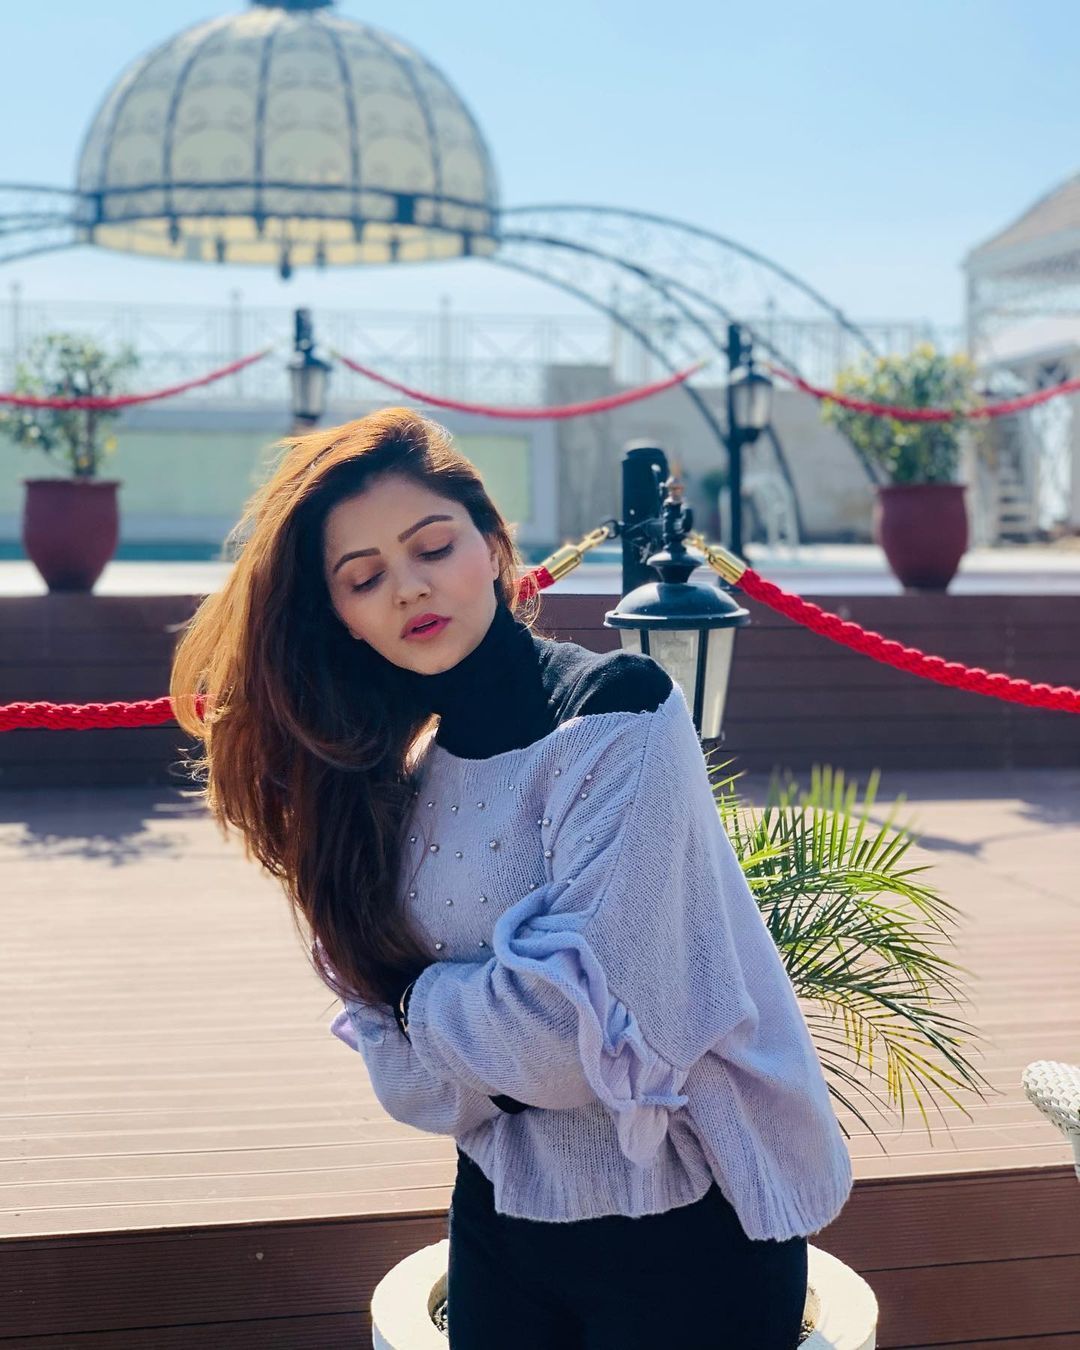 Rubina Dilaik to take a break and focus on health post Shakti; Says ‘I’m not in the best shape’